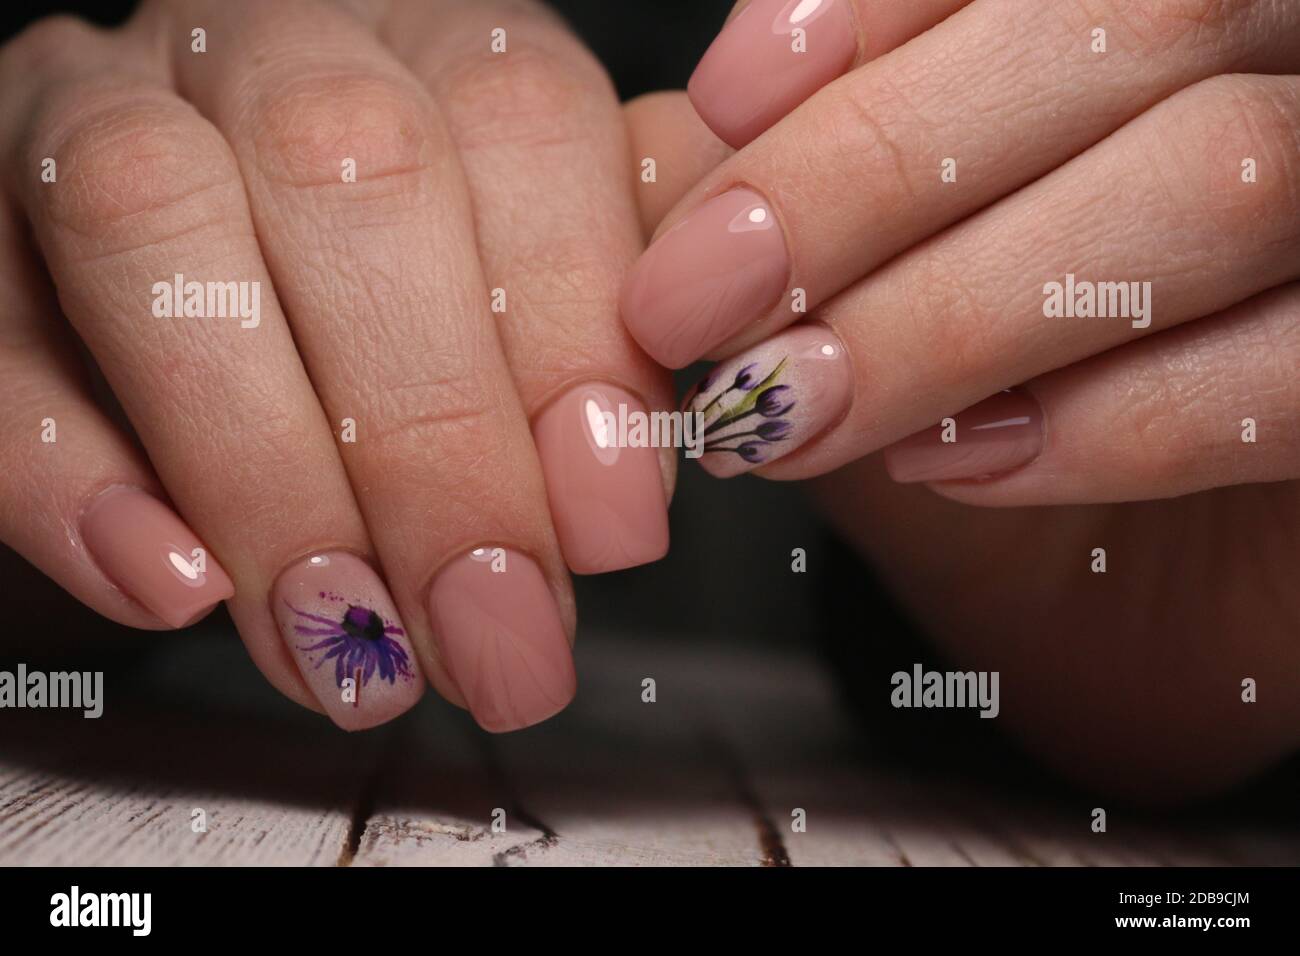 Gorgeous manicure, dark purple tender color nail polish, closeup photo.  Female hands over simple background of casual clothes Stock Photo - Alamy